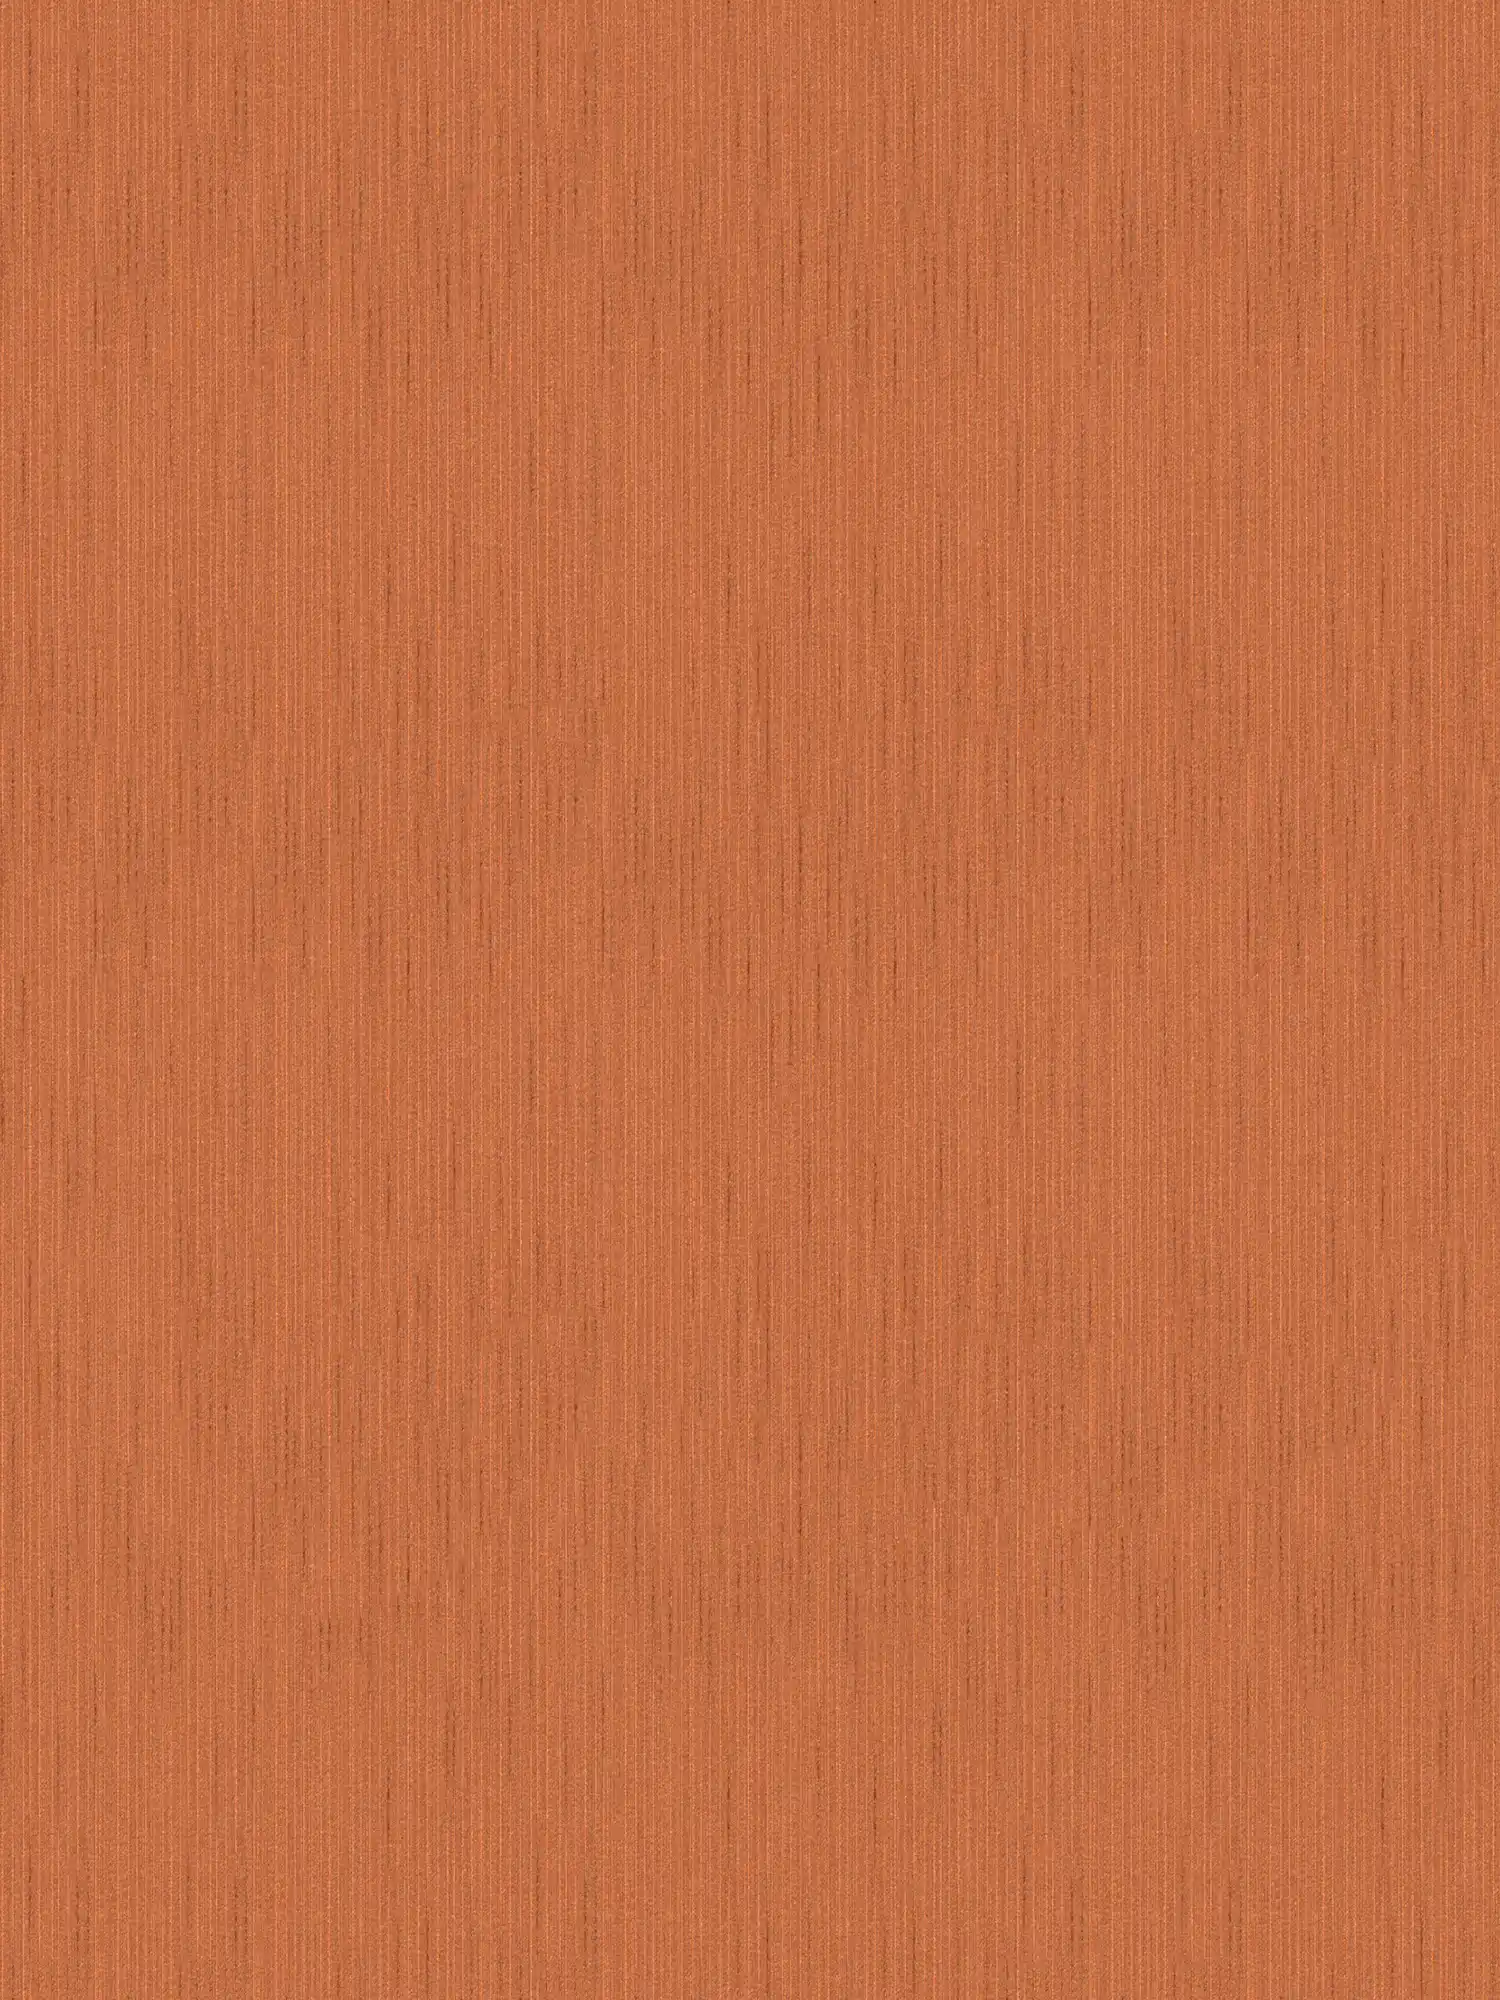 Wallpaper terracotta with texture effect in ethnic style
